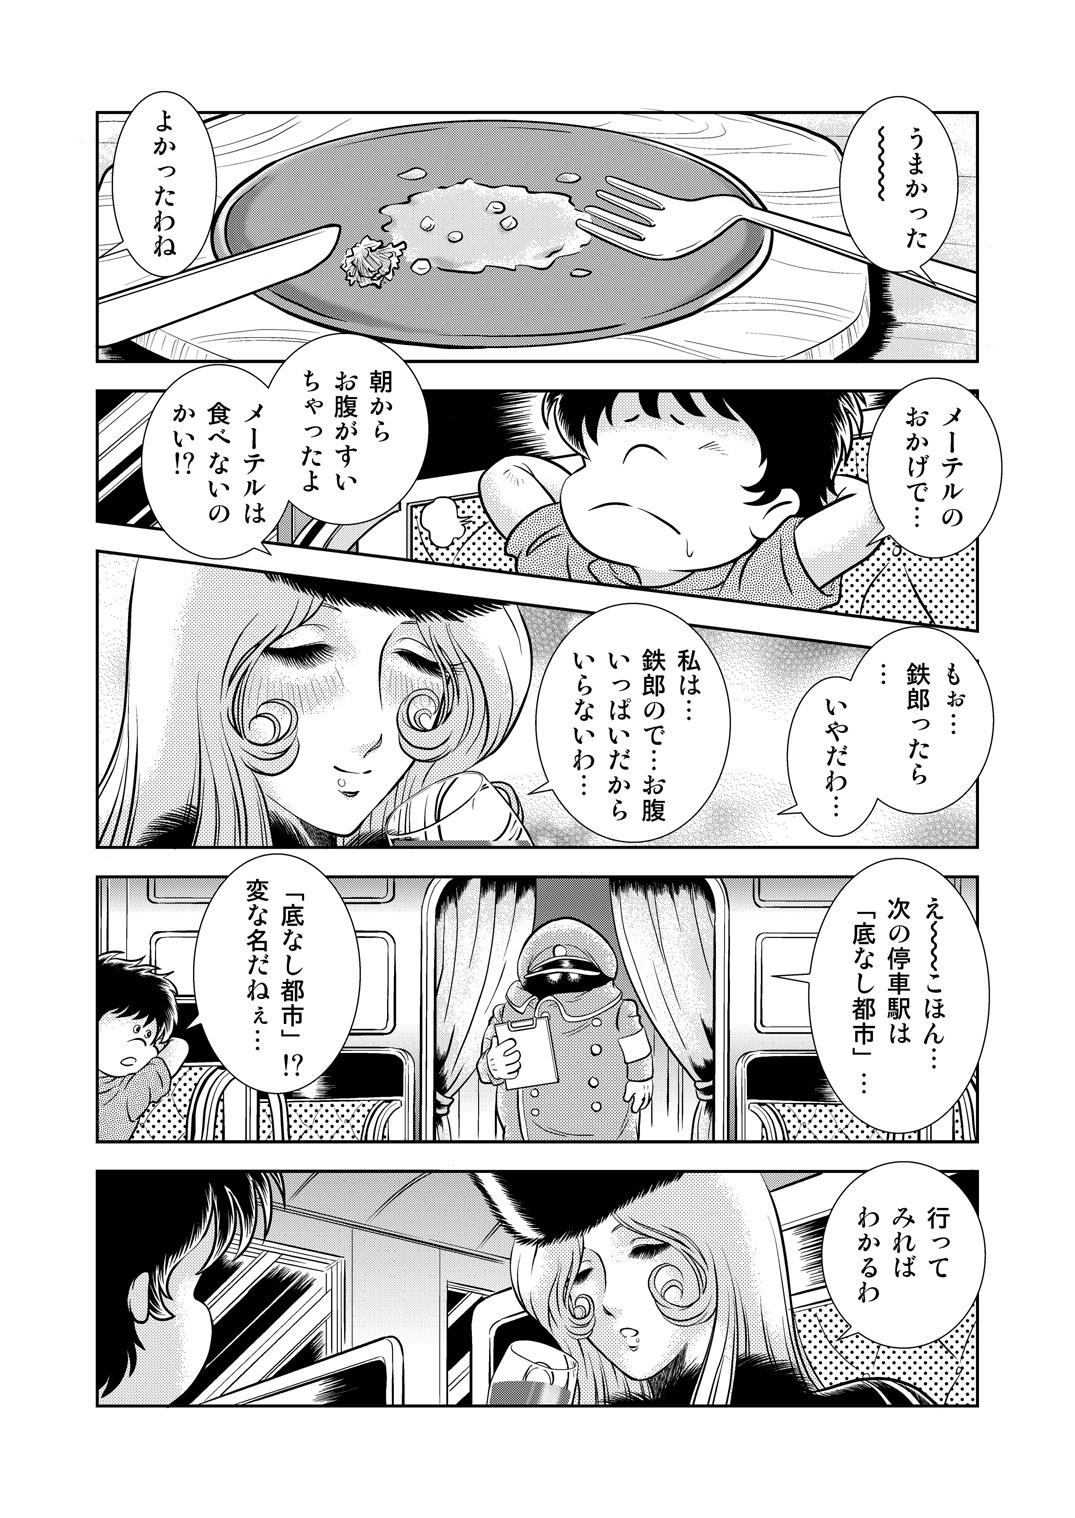 Piroca Maetel Story 8 - Galaxy express 999 Dick Suckers - Page 10